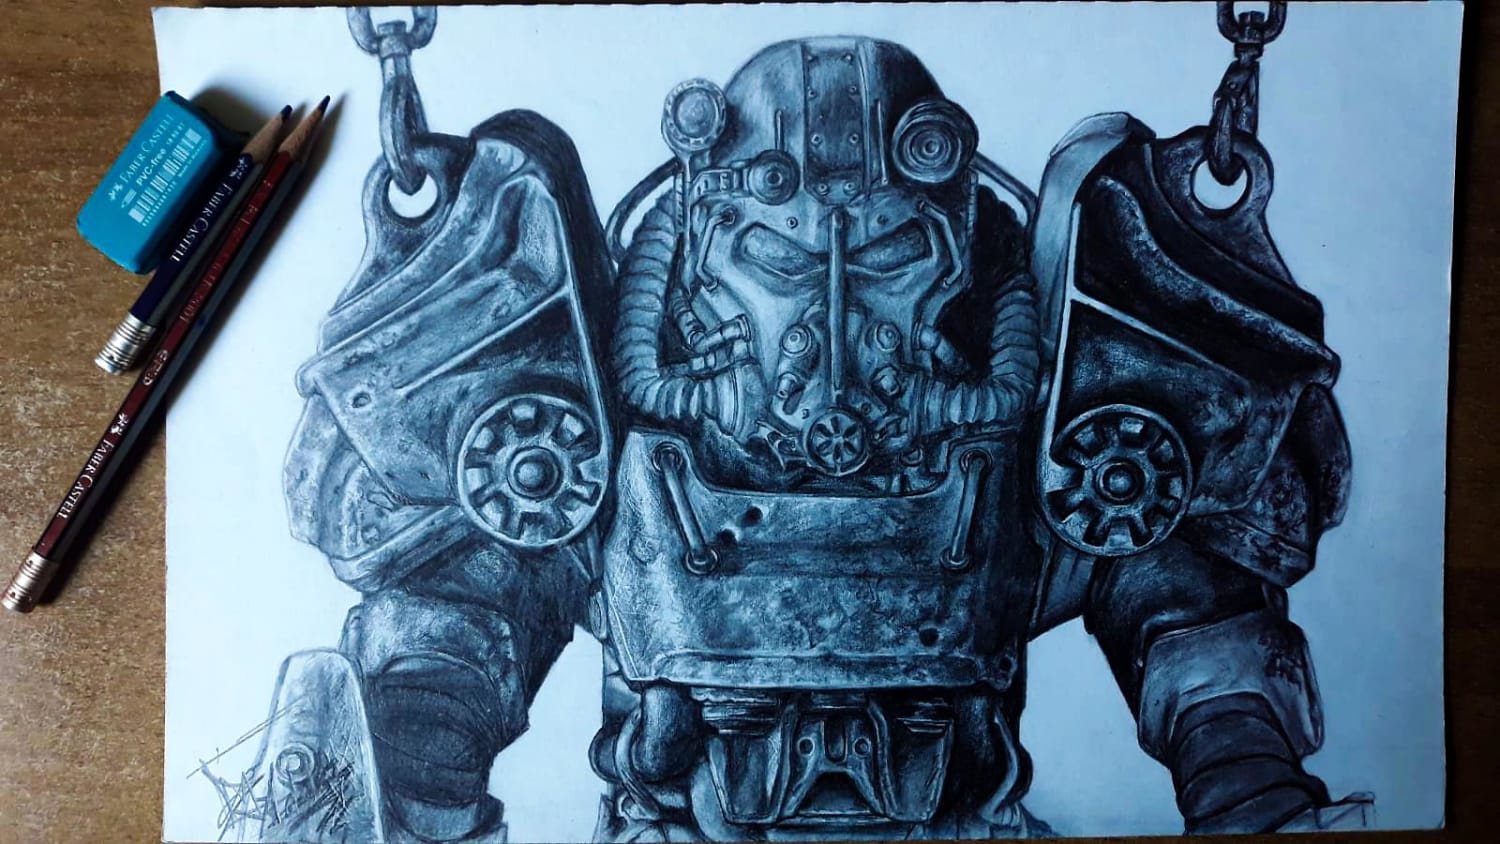 Just finished this drawing of a Fallout 4 power armor for my friend's birthday